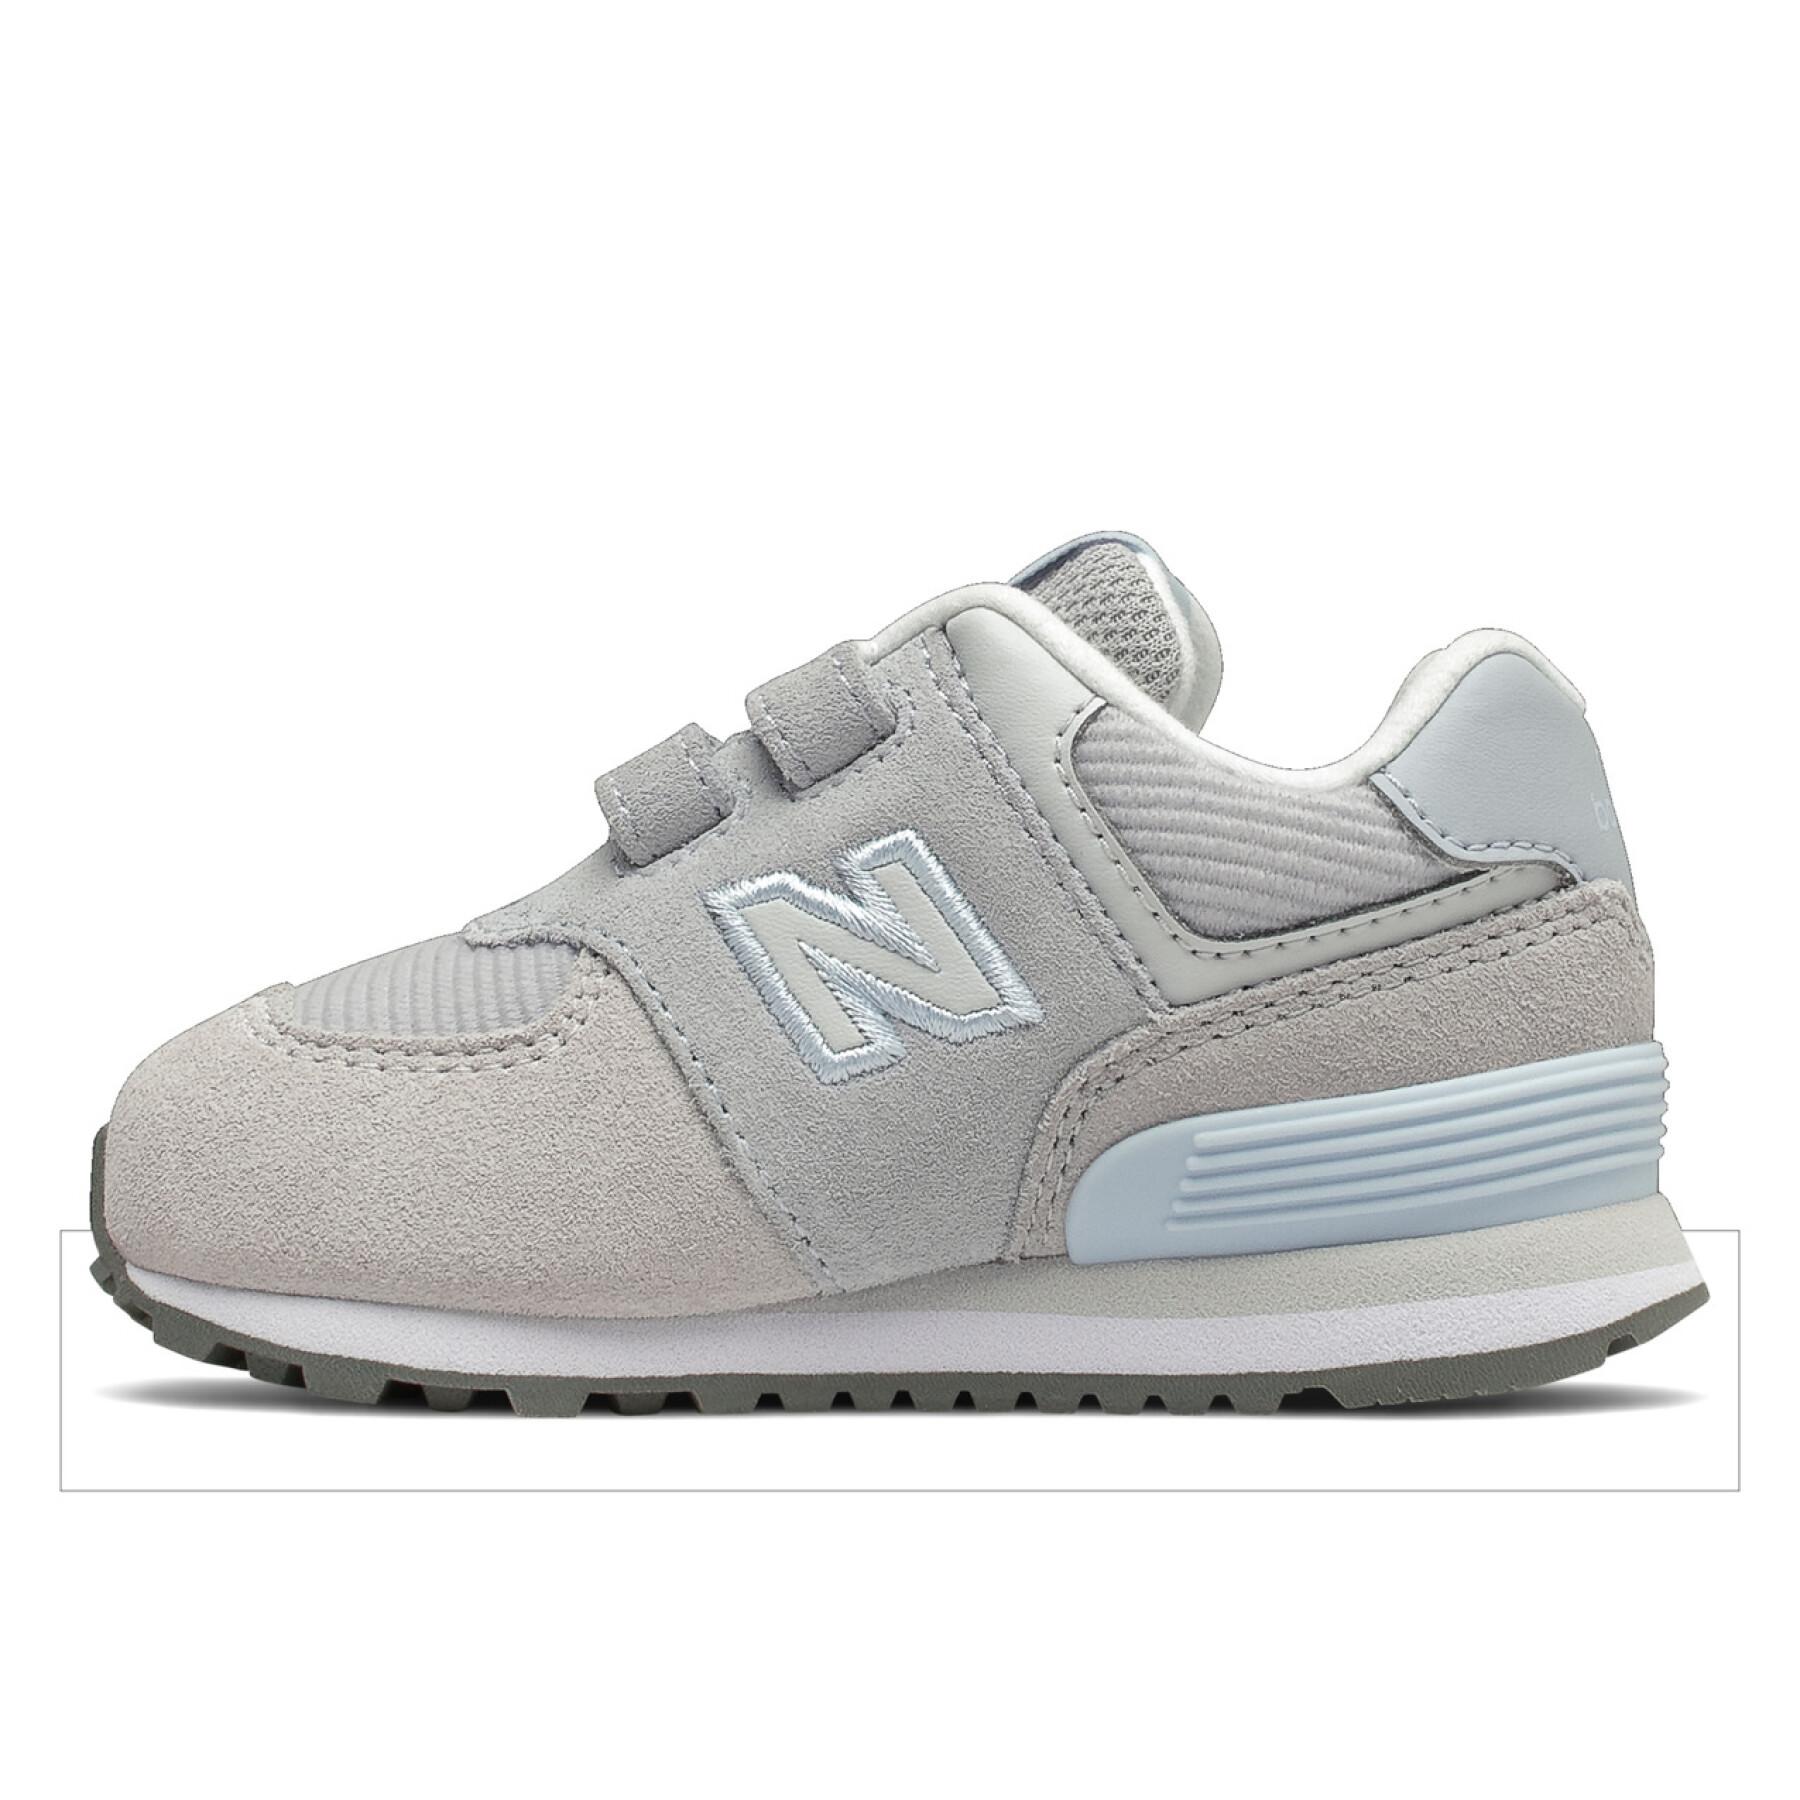 Baby shoes New Balance 574